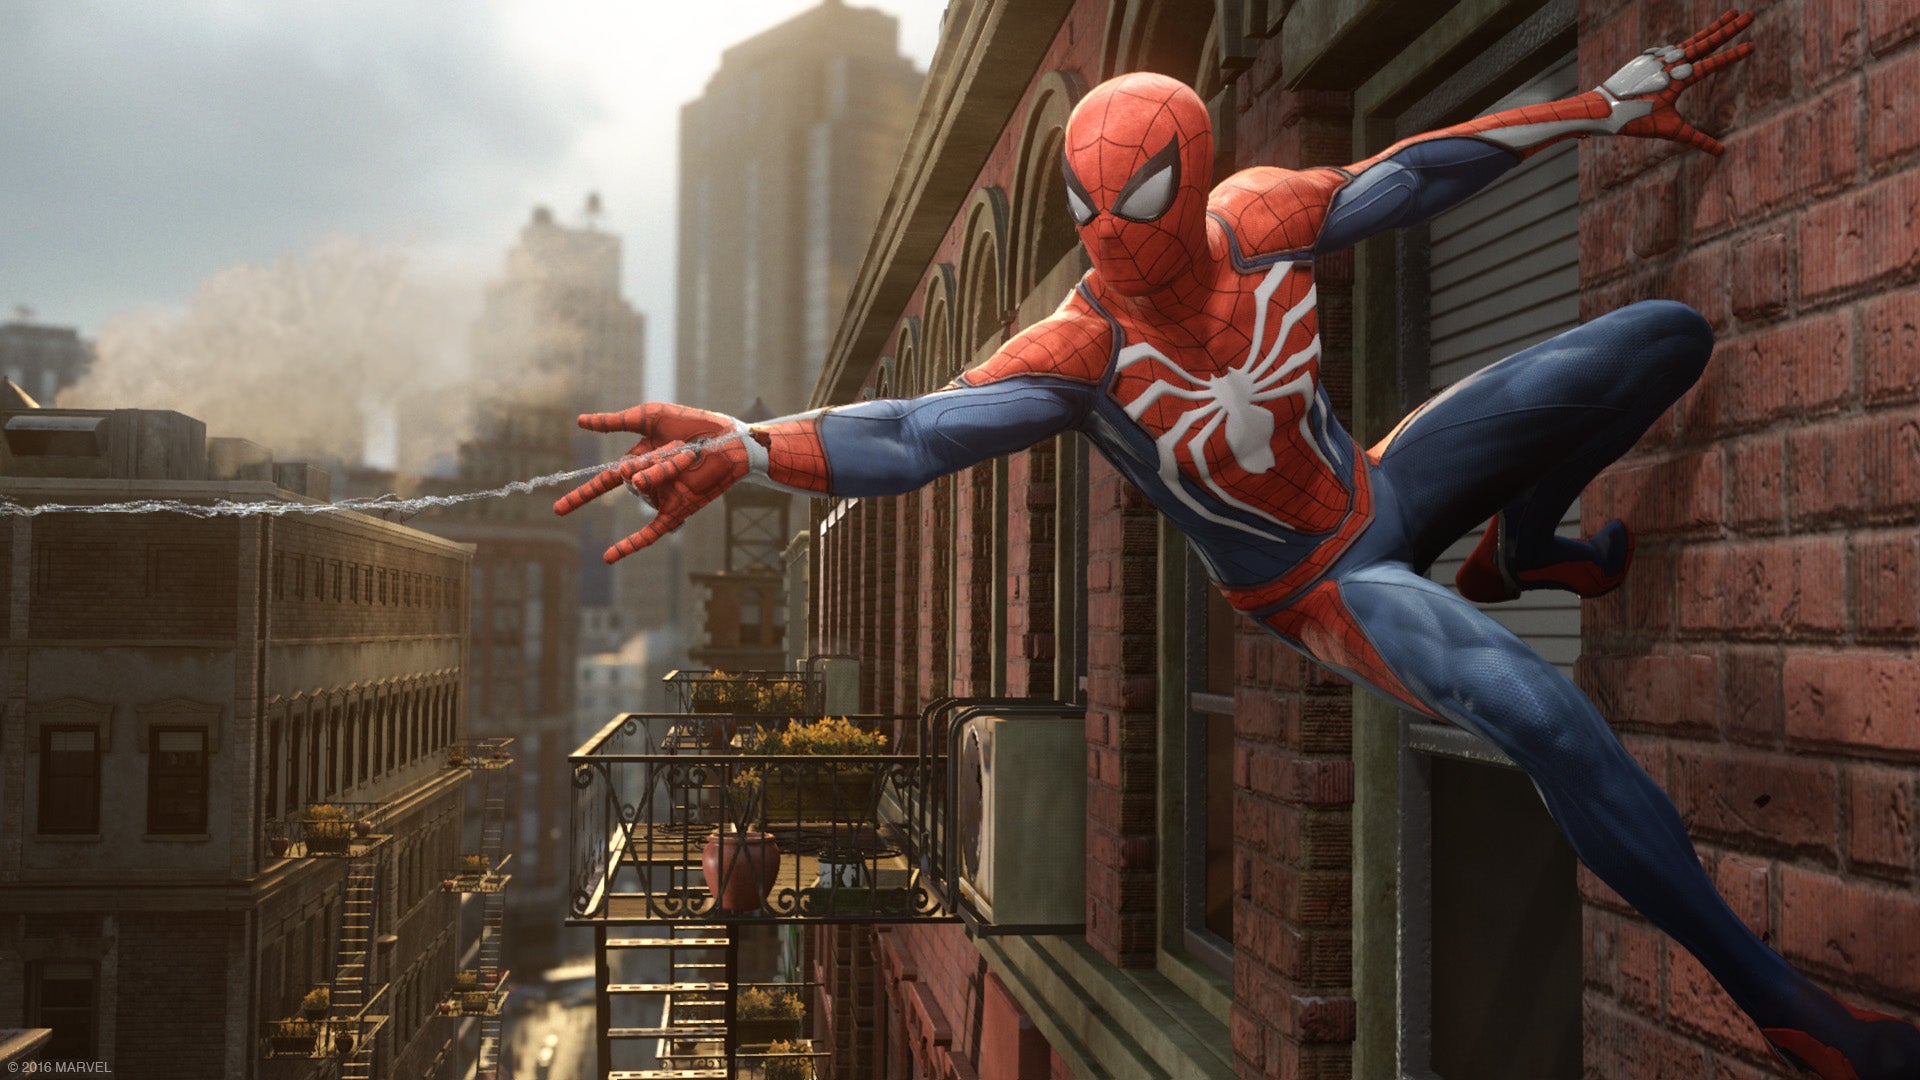 Screenshot of Spider-Man from Marvel's Spider-Man Game